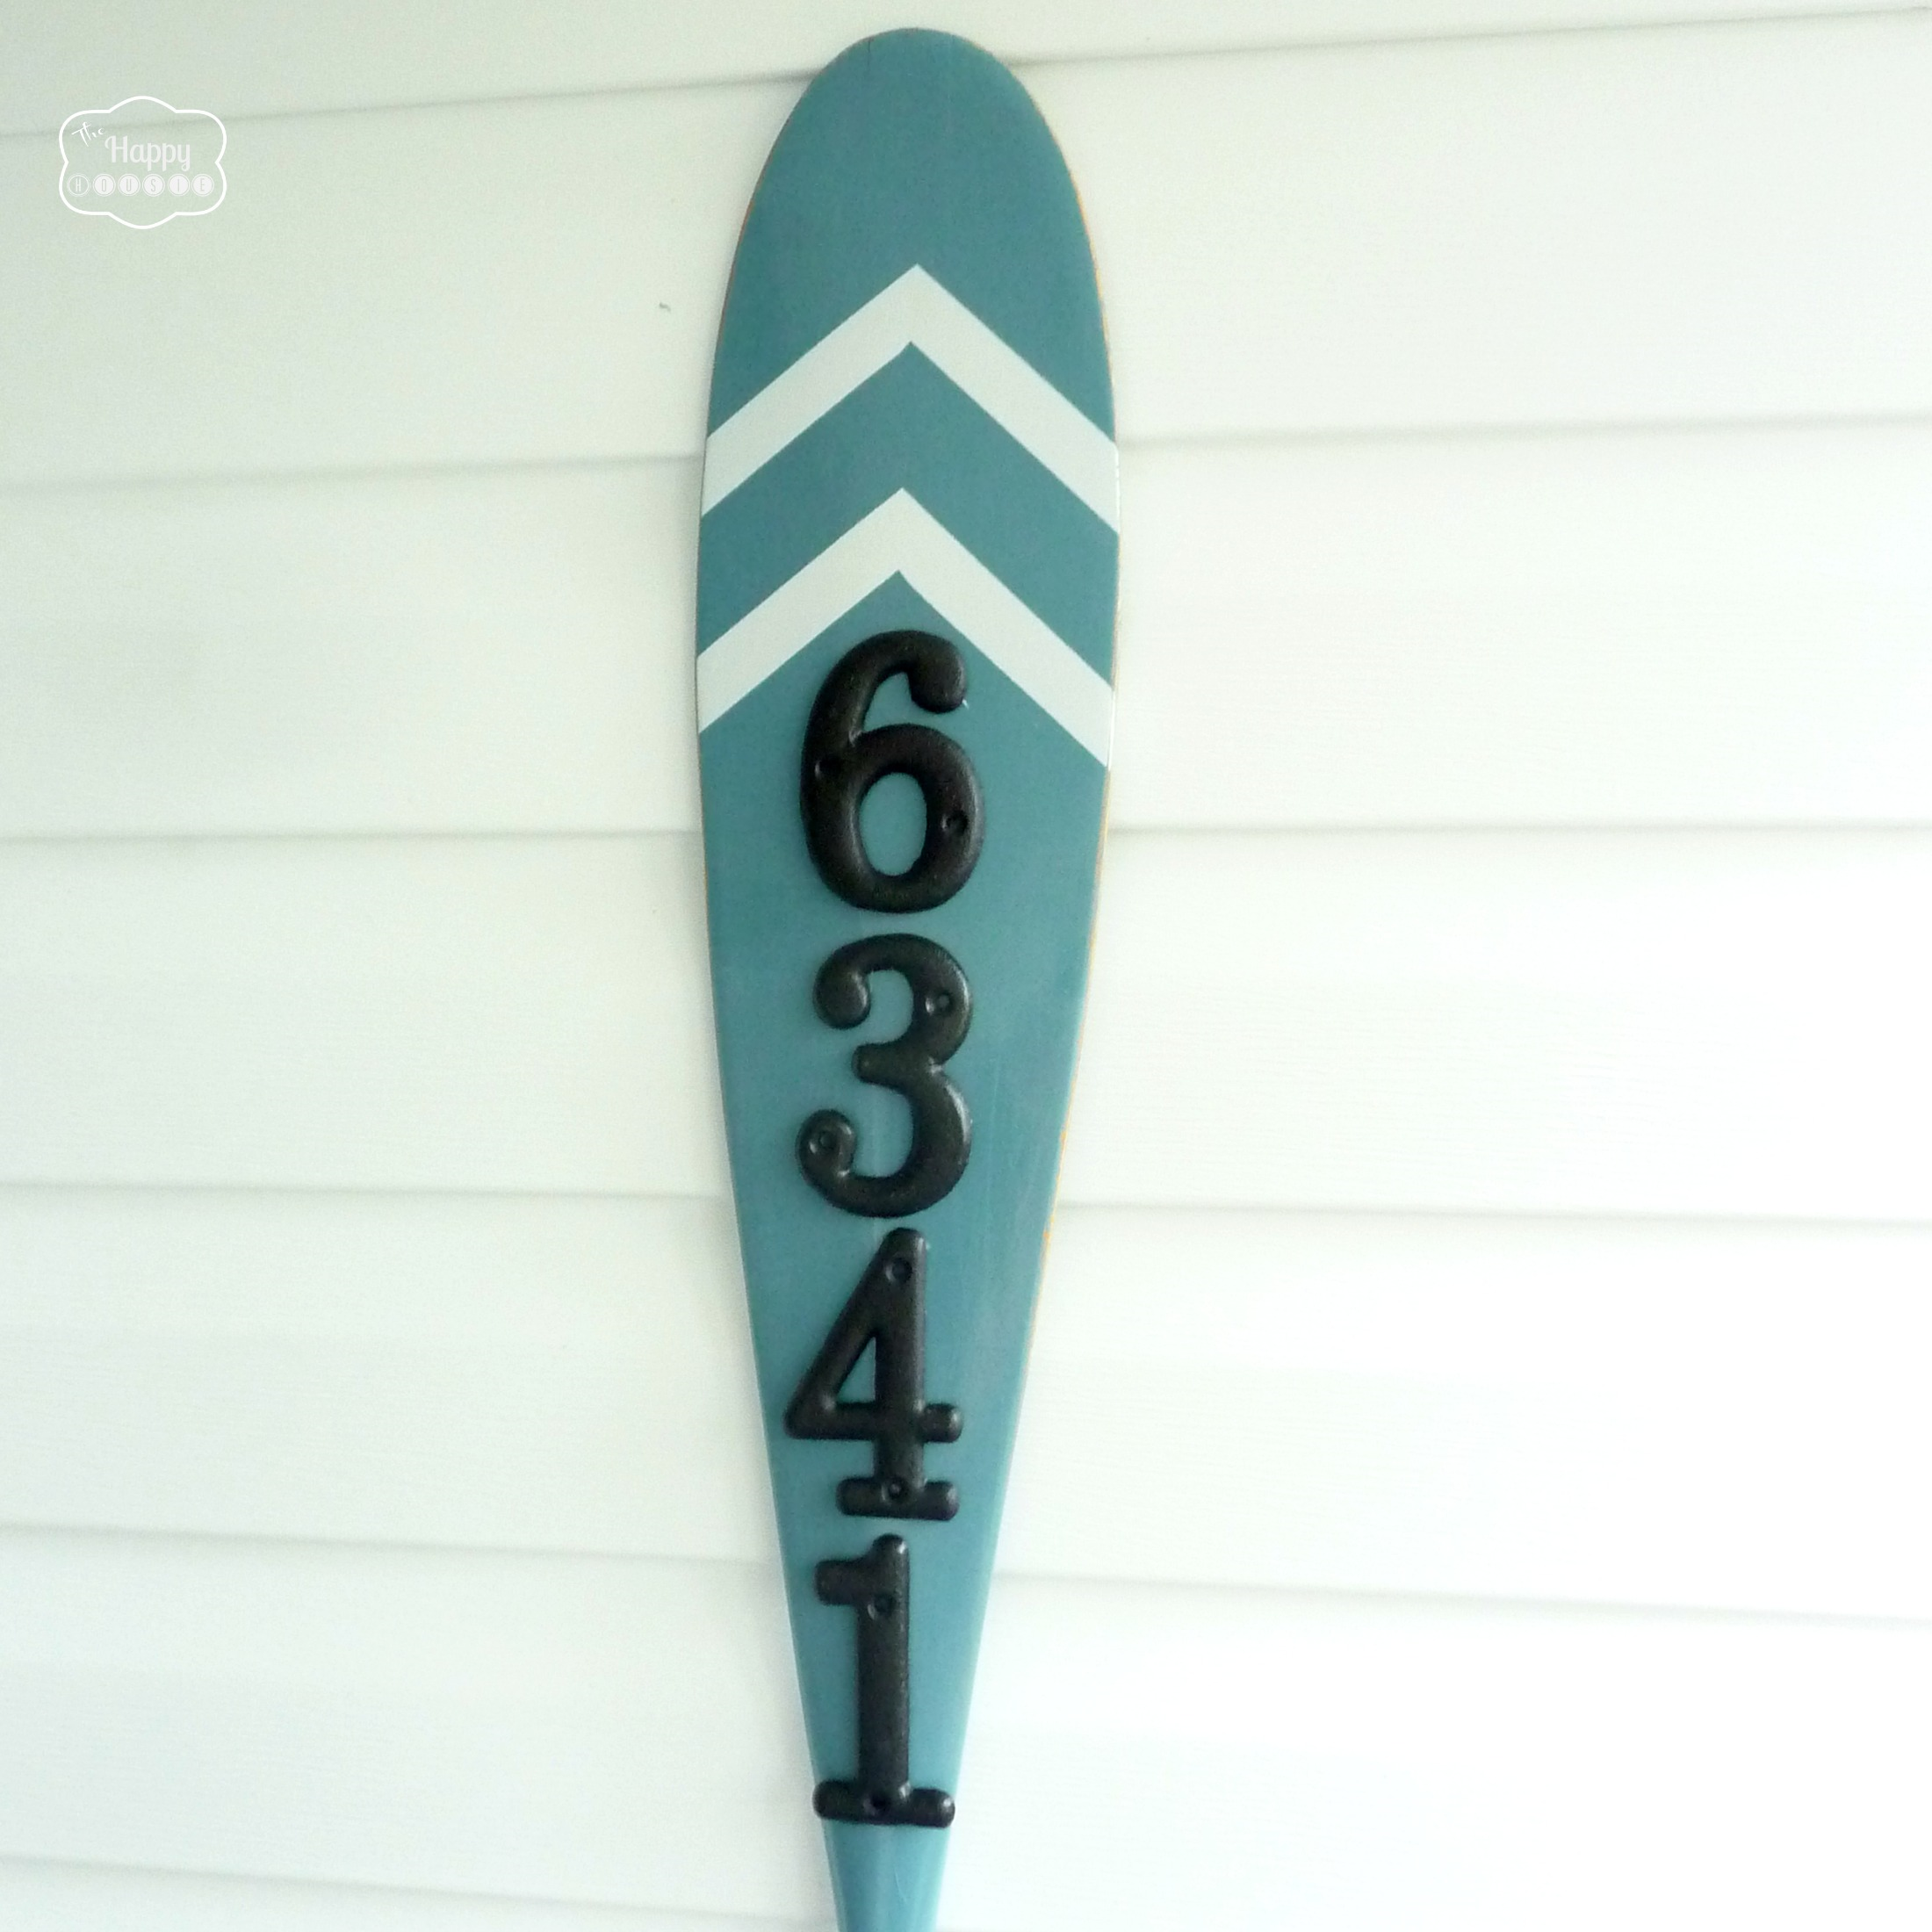 Finishing Off the Front Porch with a Vintage Paddle Address Sign